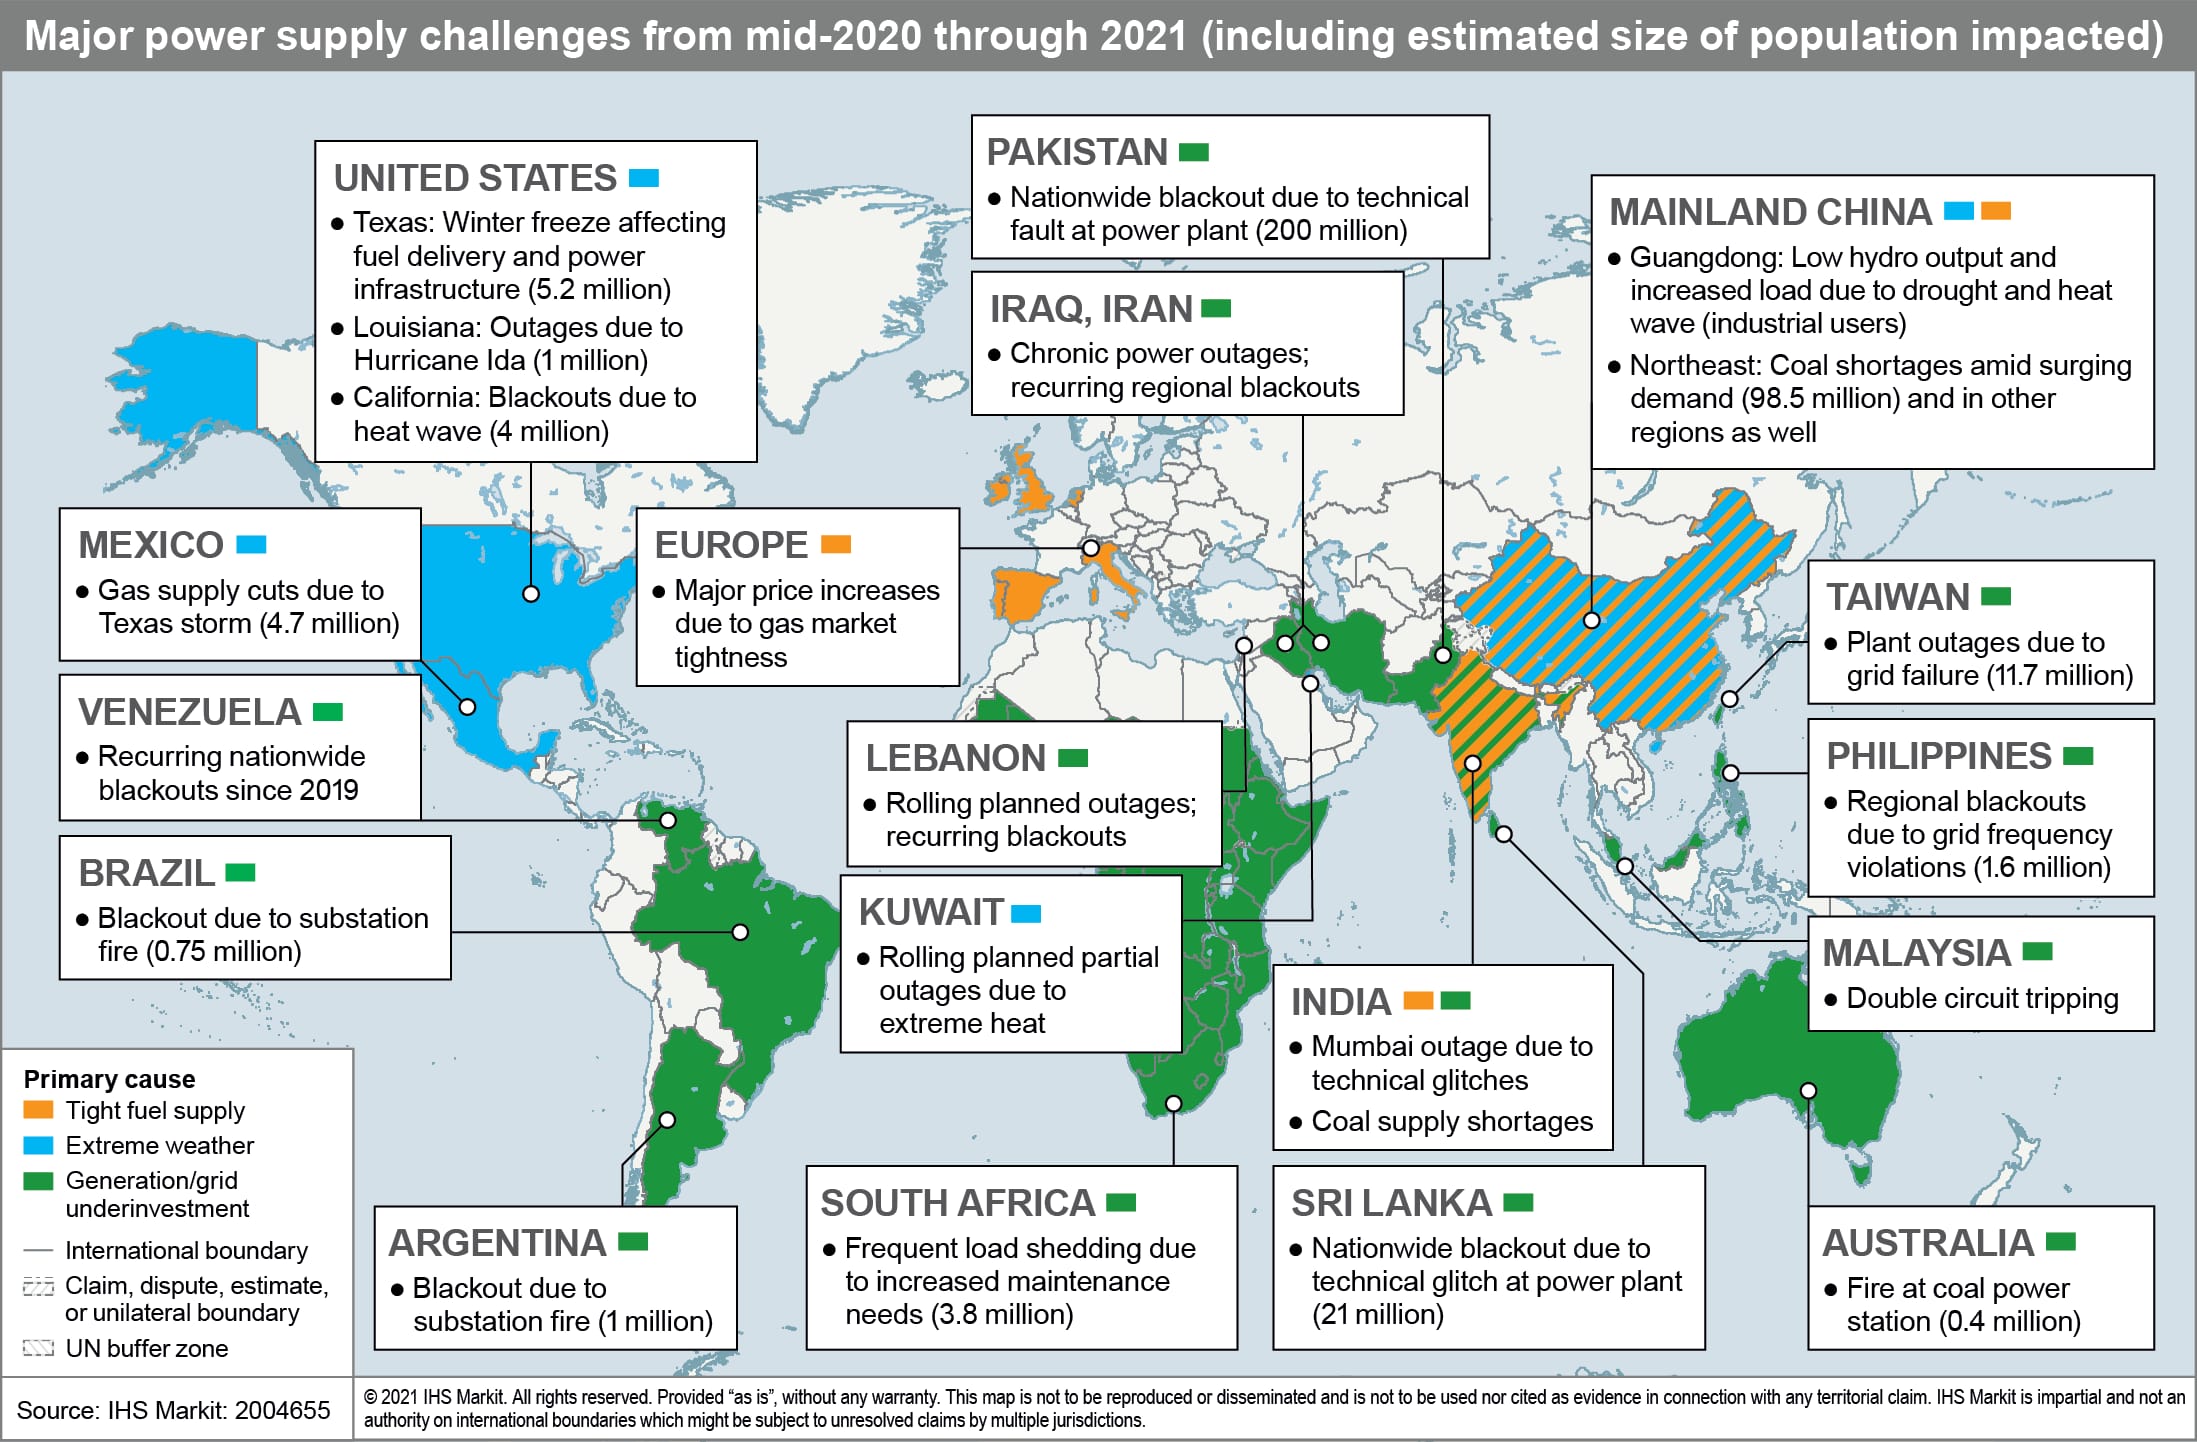 Major power supply challenges from mid-2020 through 2021